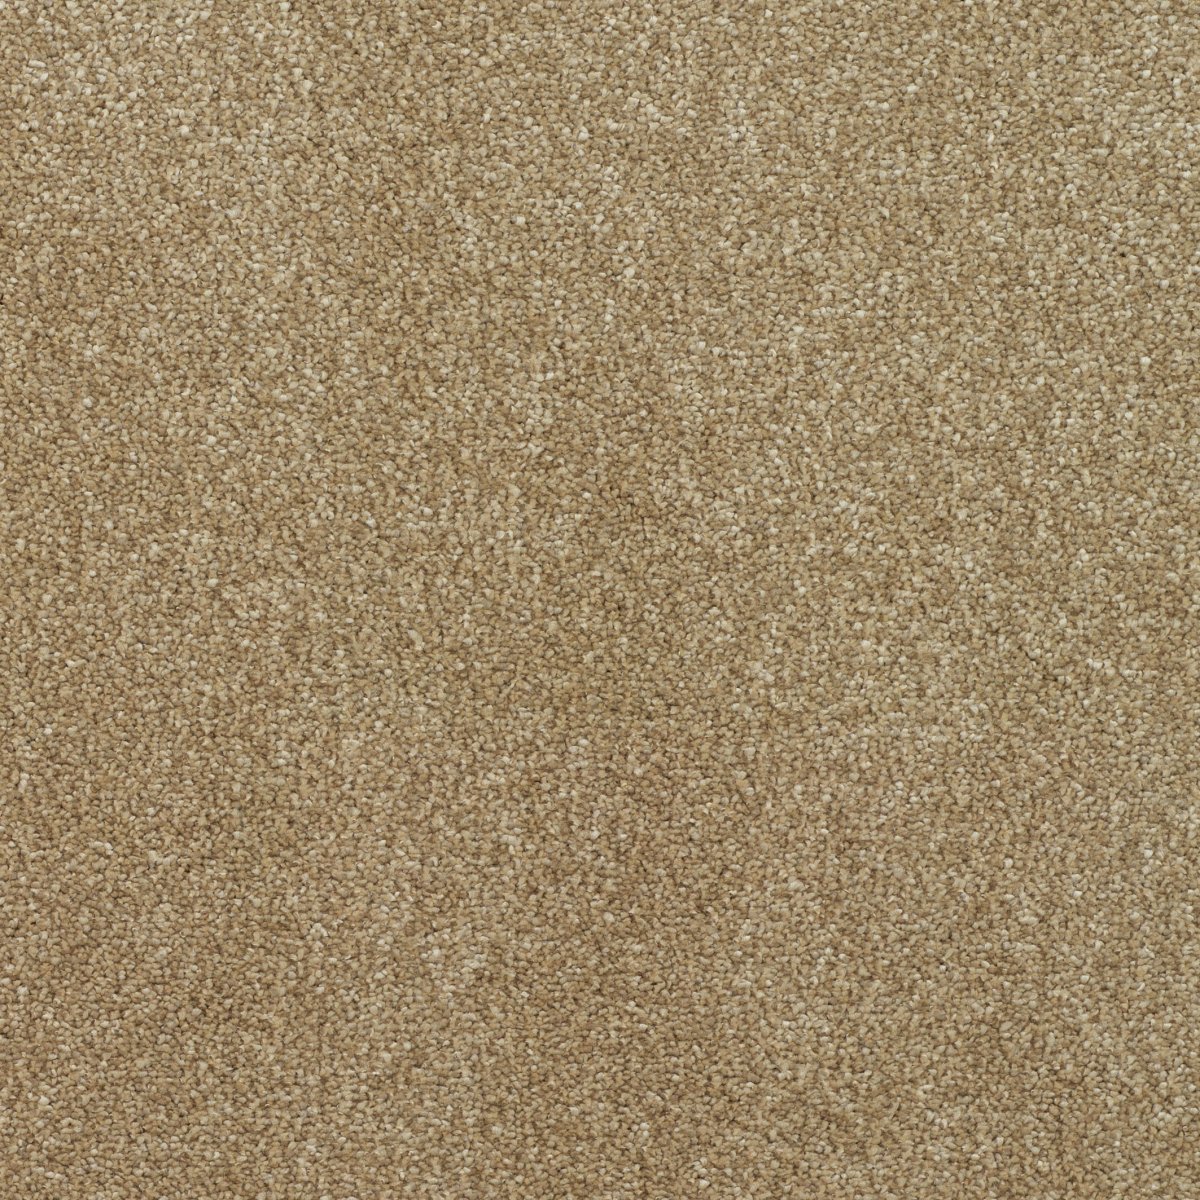 Regal Touch Luxurious Heavy Twist Carpet - Stately